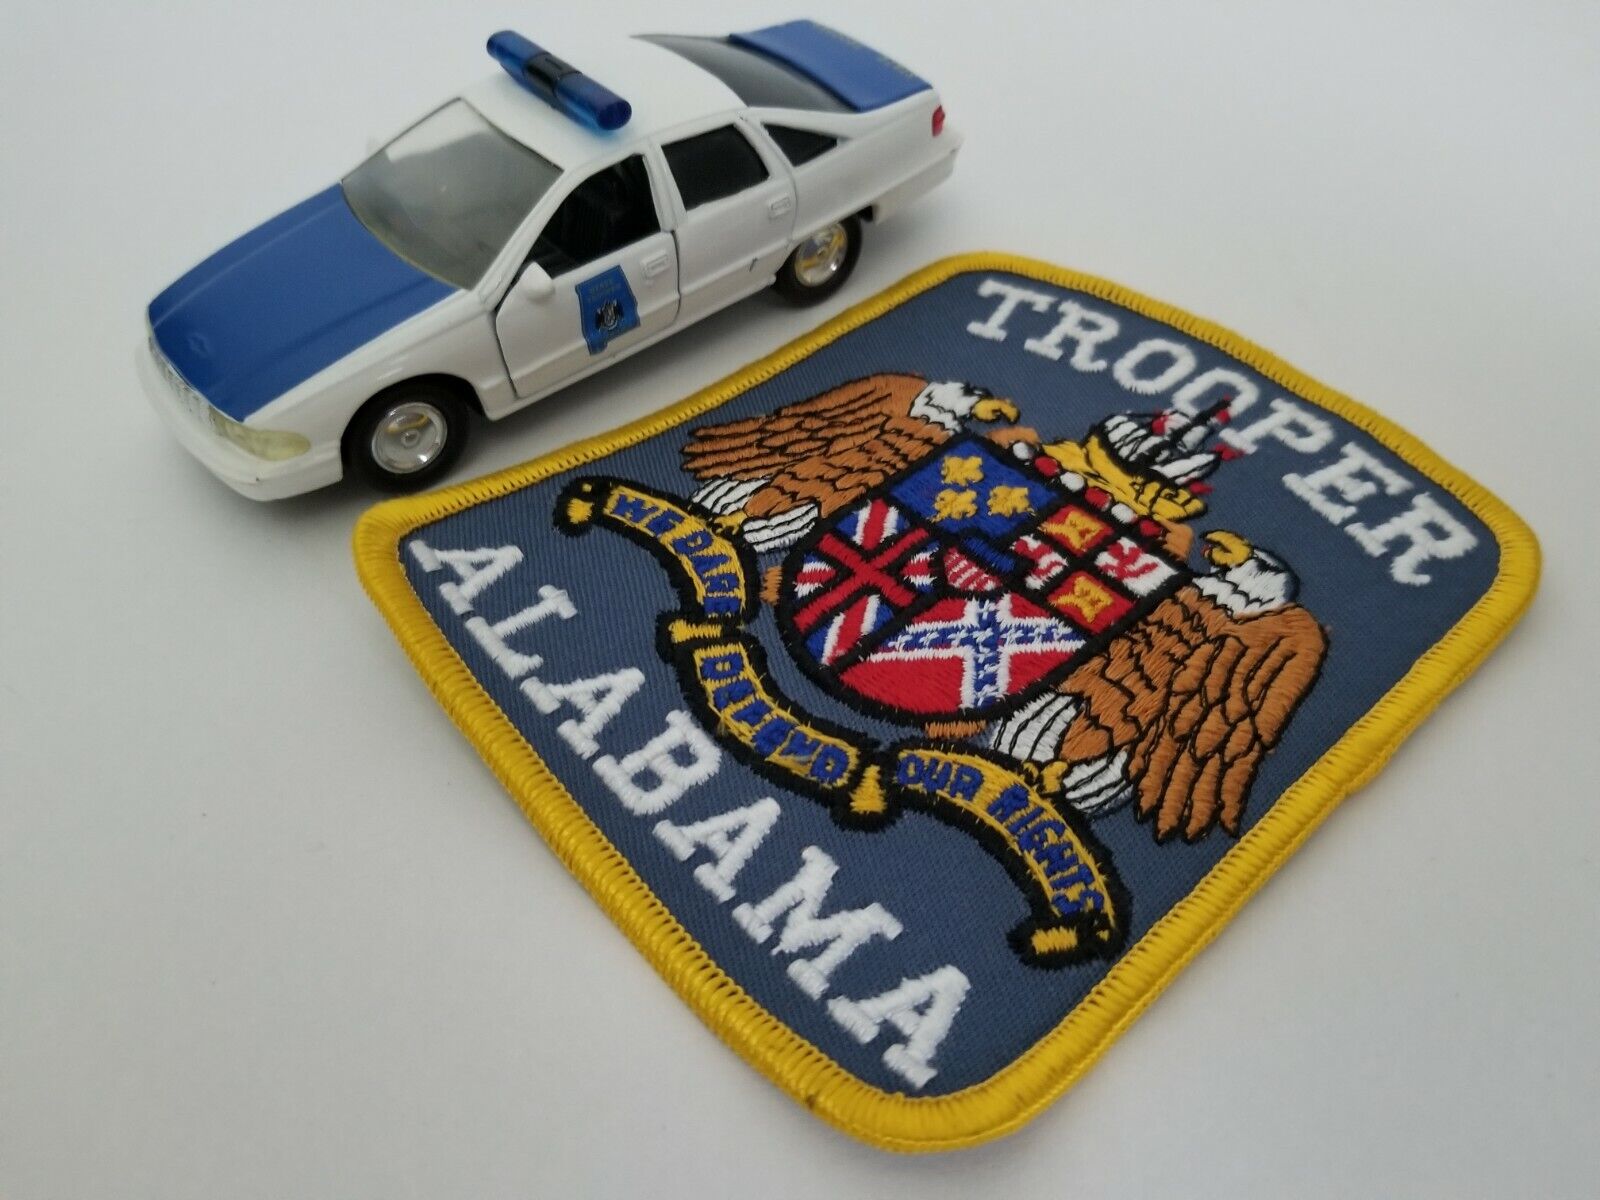 Roadchamps 1:43 Diecast Police Cruiser and Agency Patch (Alabama State Trooper)